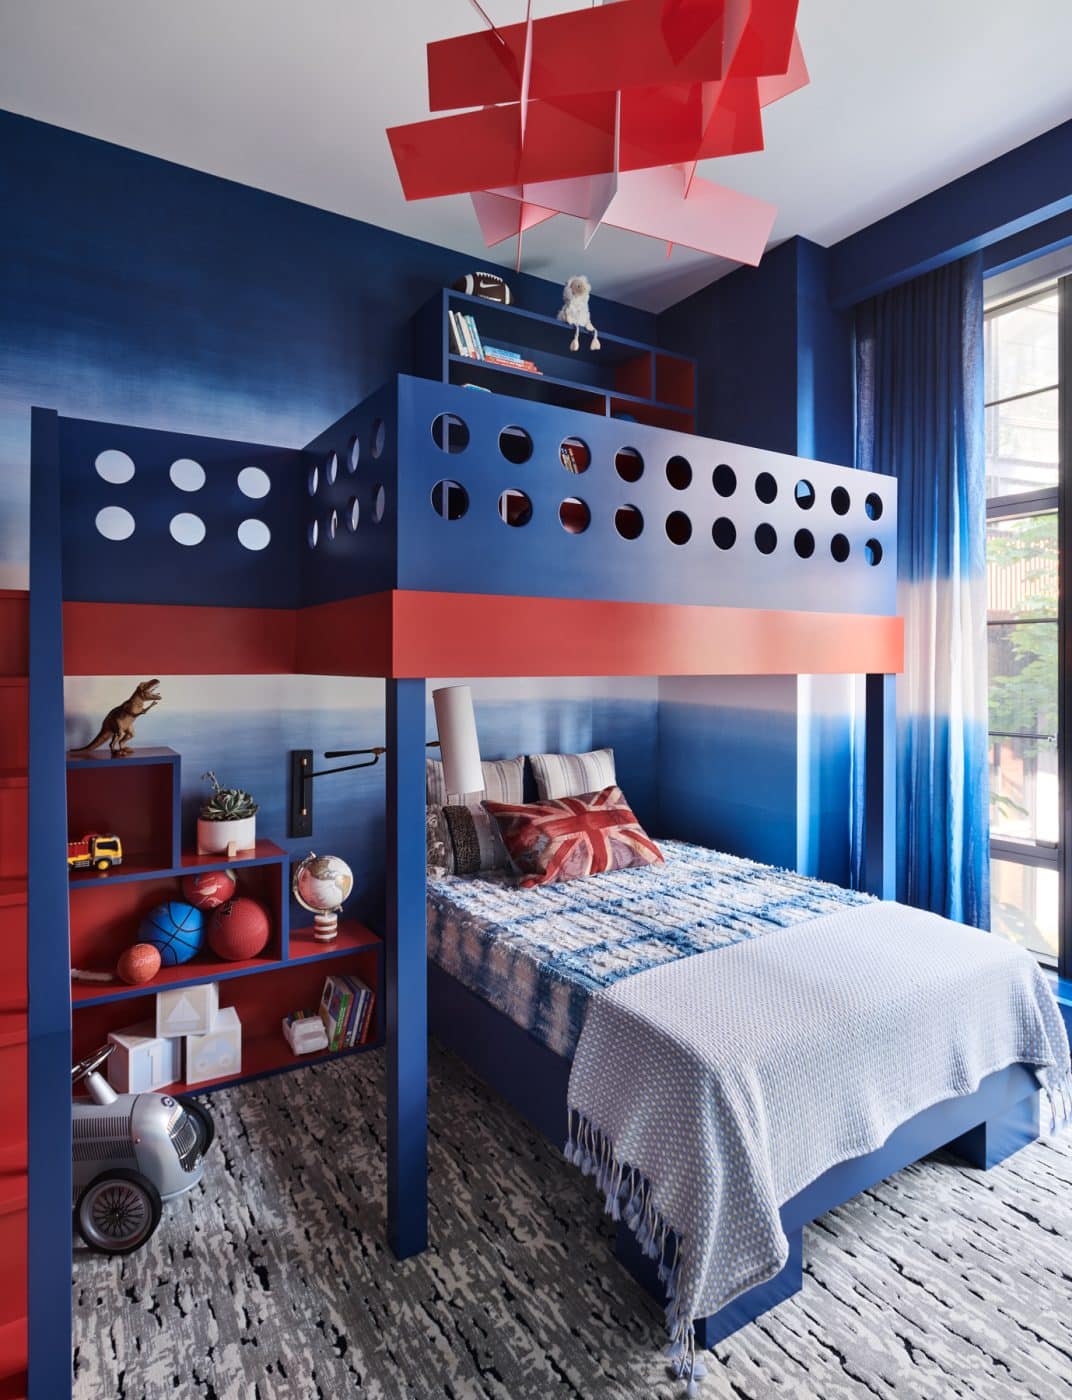 Son's bedroom in maisonette project in New York City's West Village by interior designer Daun Curry